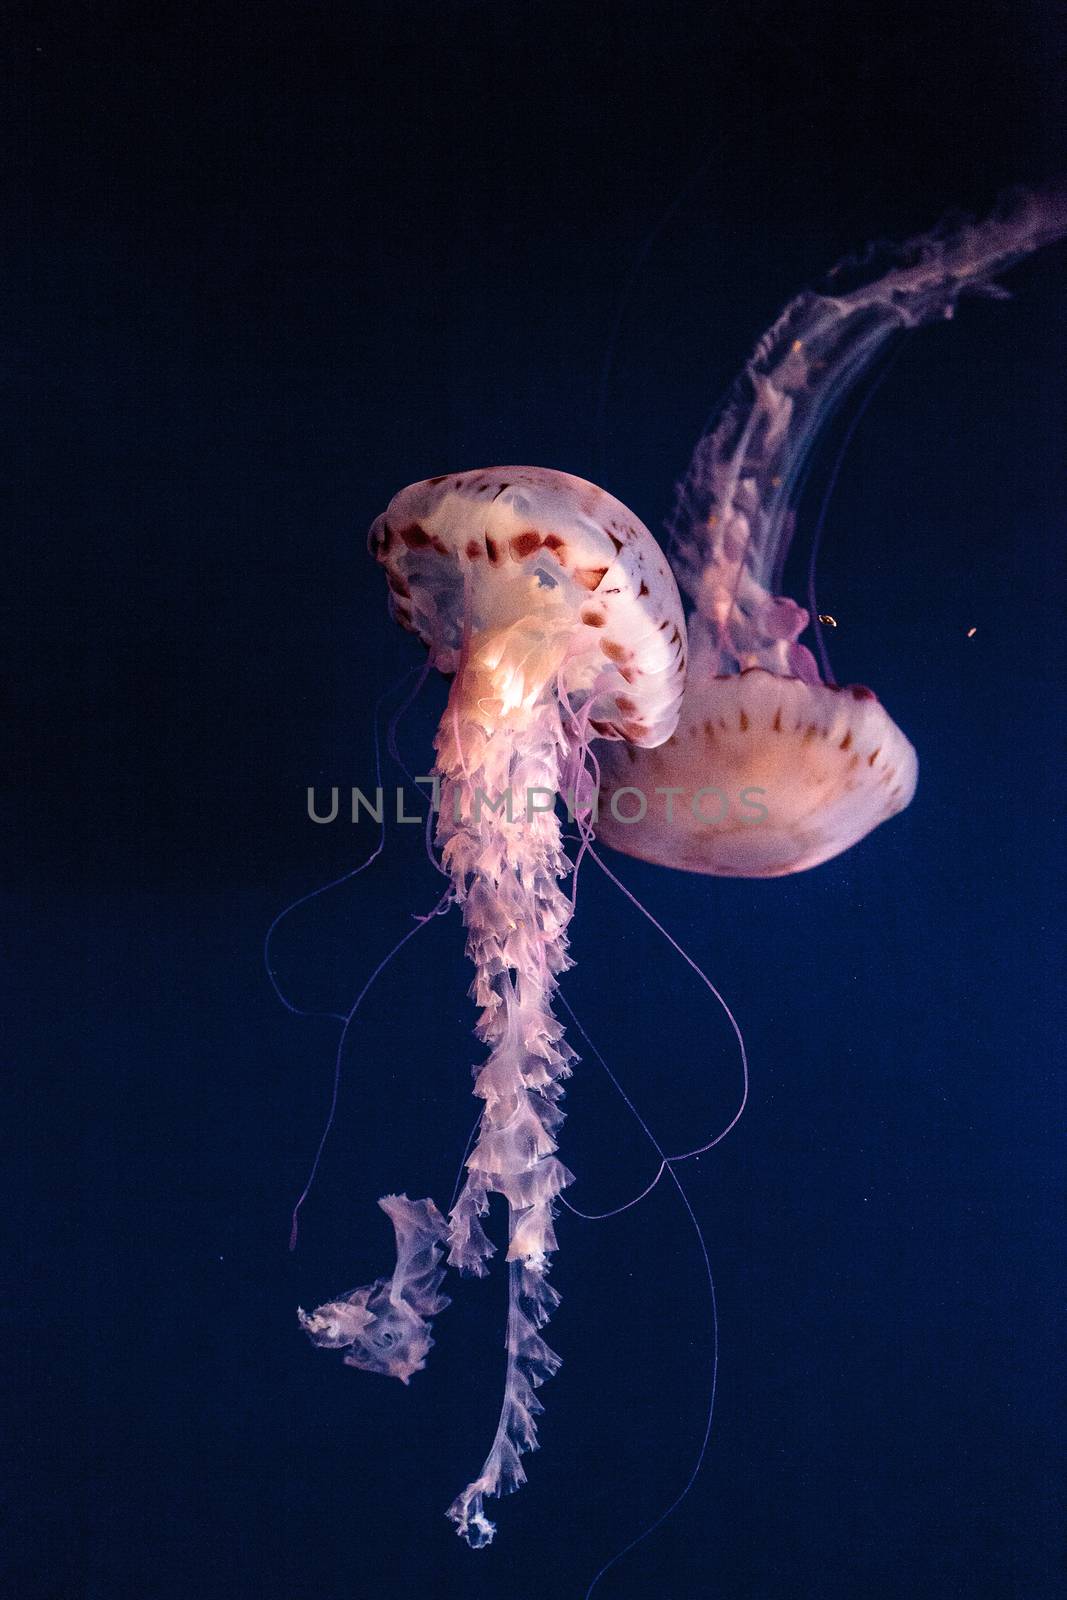 Purple striped jellyfish Chrysaora colorata has long tentacles and can be found off the coast of Monterey, California in the United States